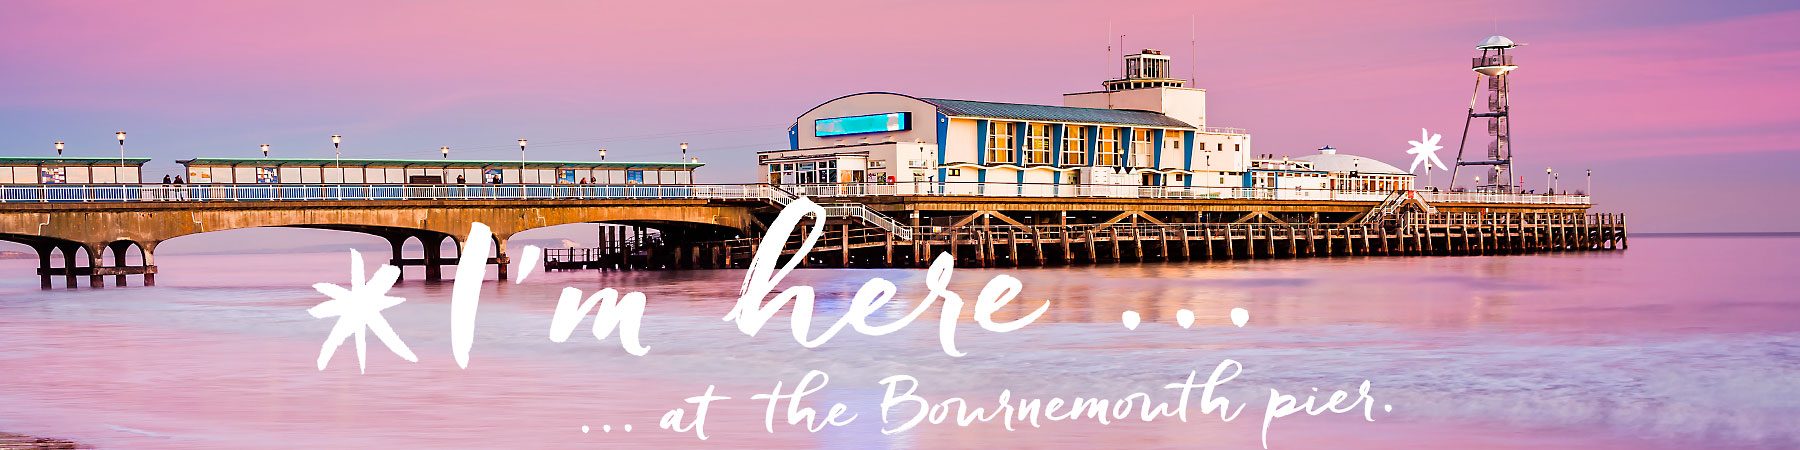 I'm here ... at the Bournemouth Pier.